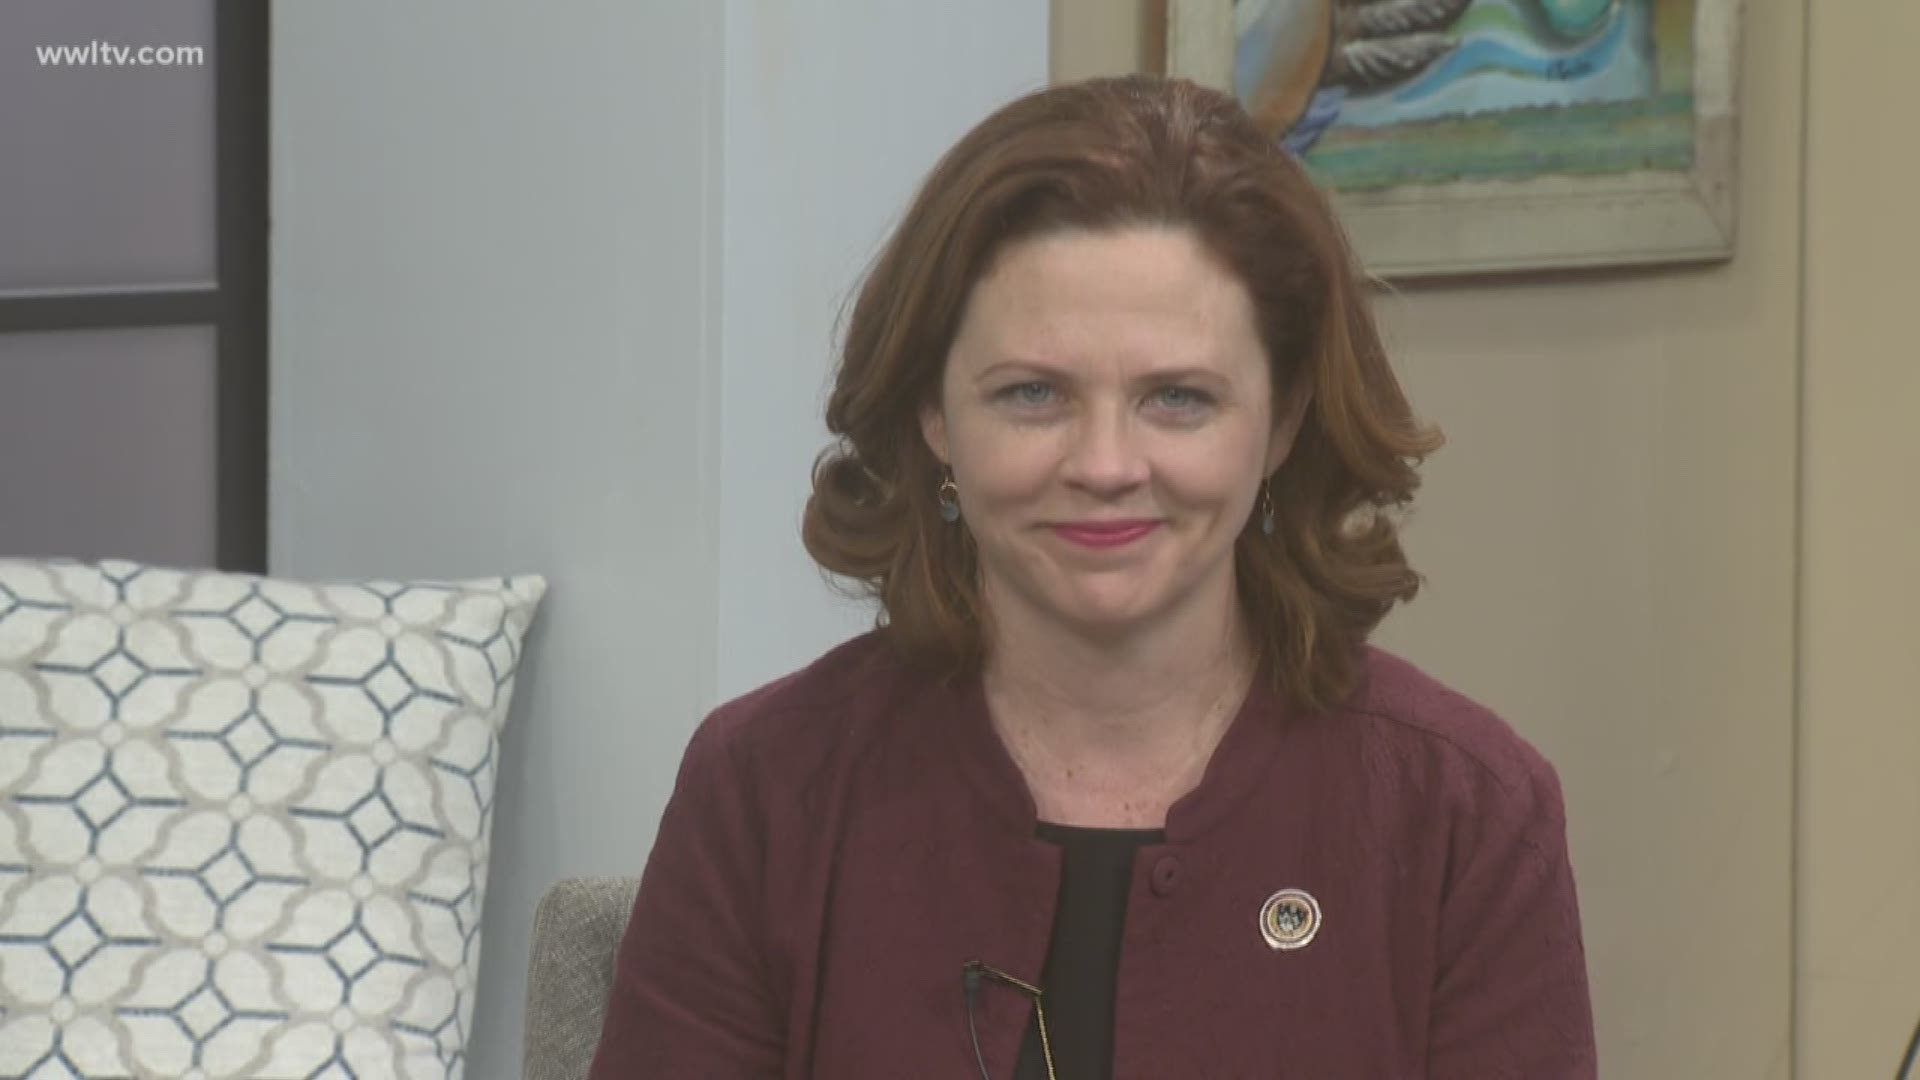 President of Loyola University Tania Tetlow is in to talk about a great opportunity for local women to reach their full professional potential.